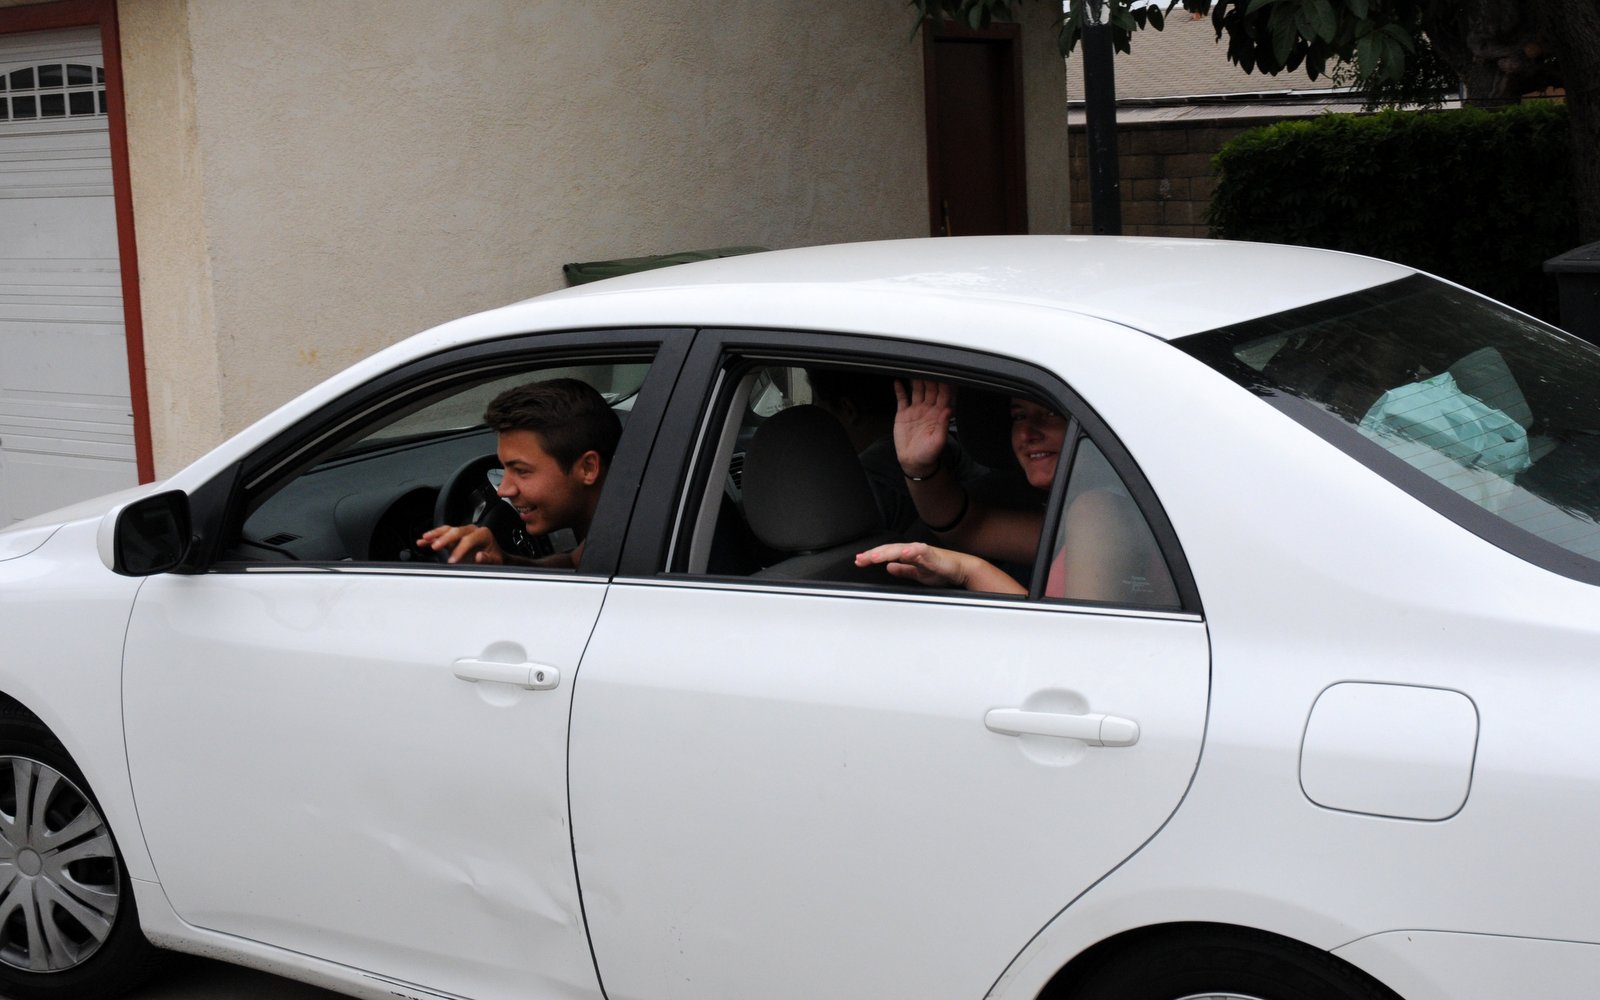 Akos & Eszter wave out of the driver's side of the car